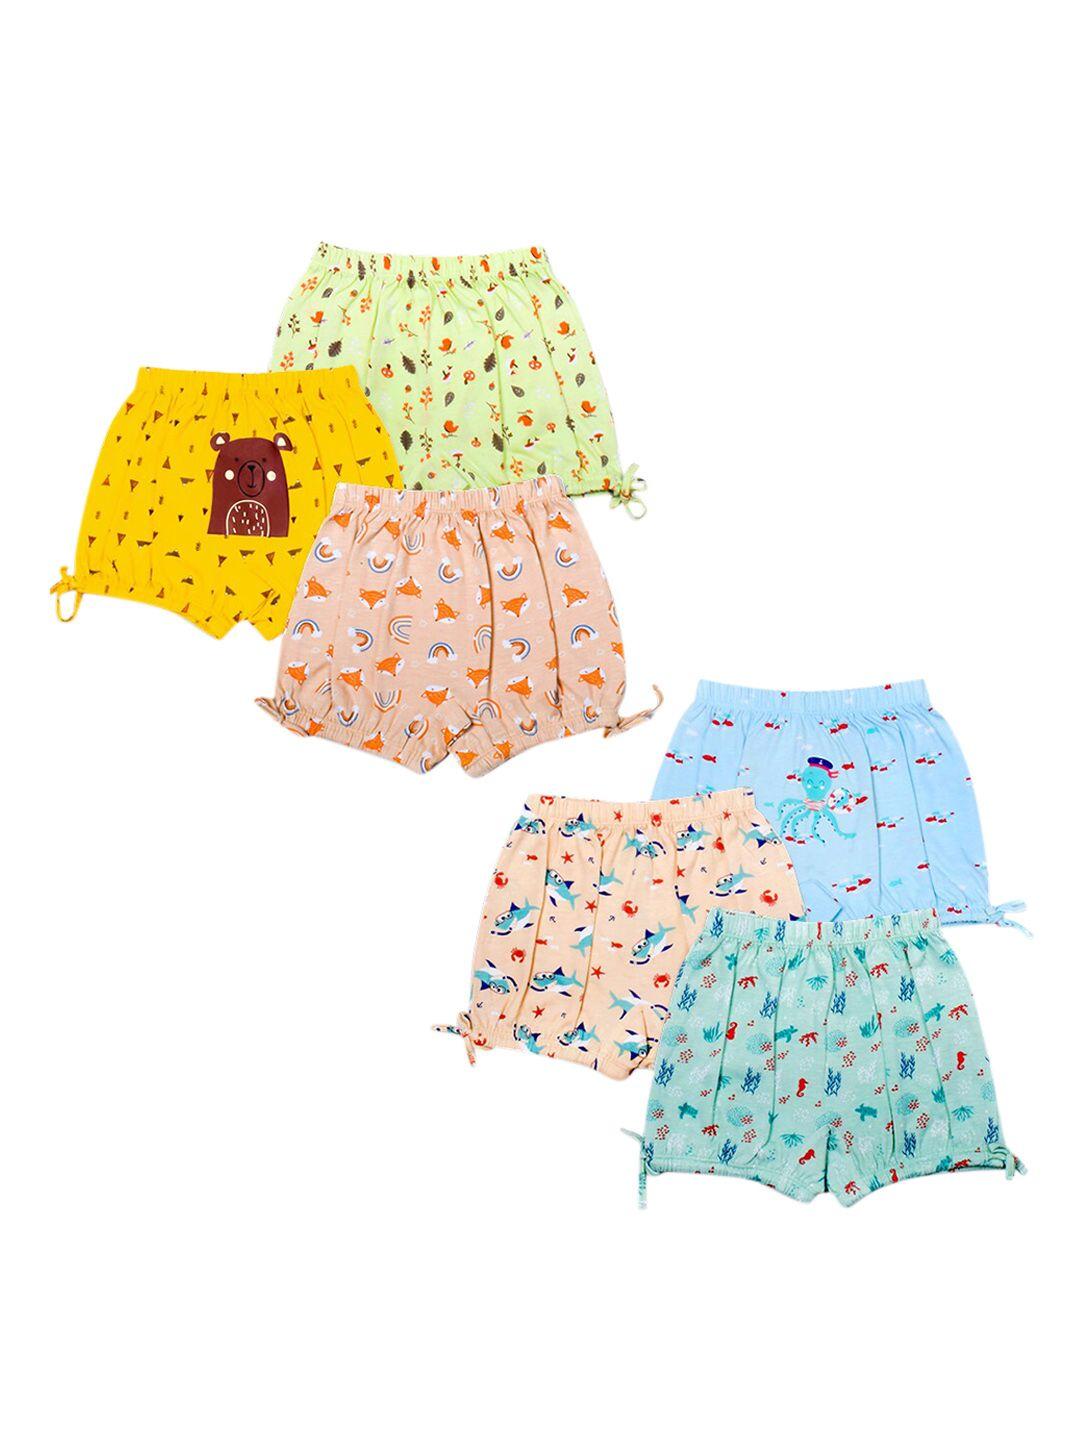 superbottoms-kids-pack-of-6-printed-sustainable-boy-shorts